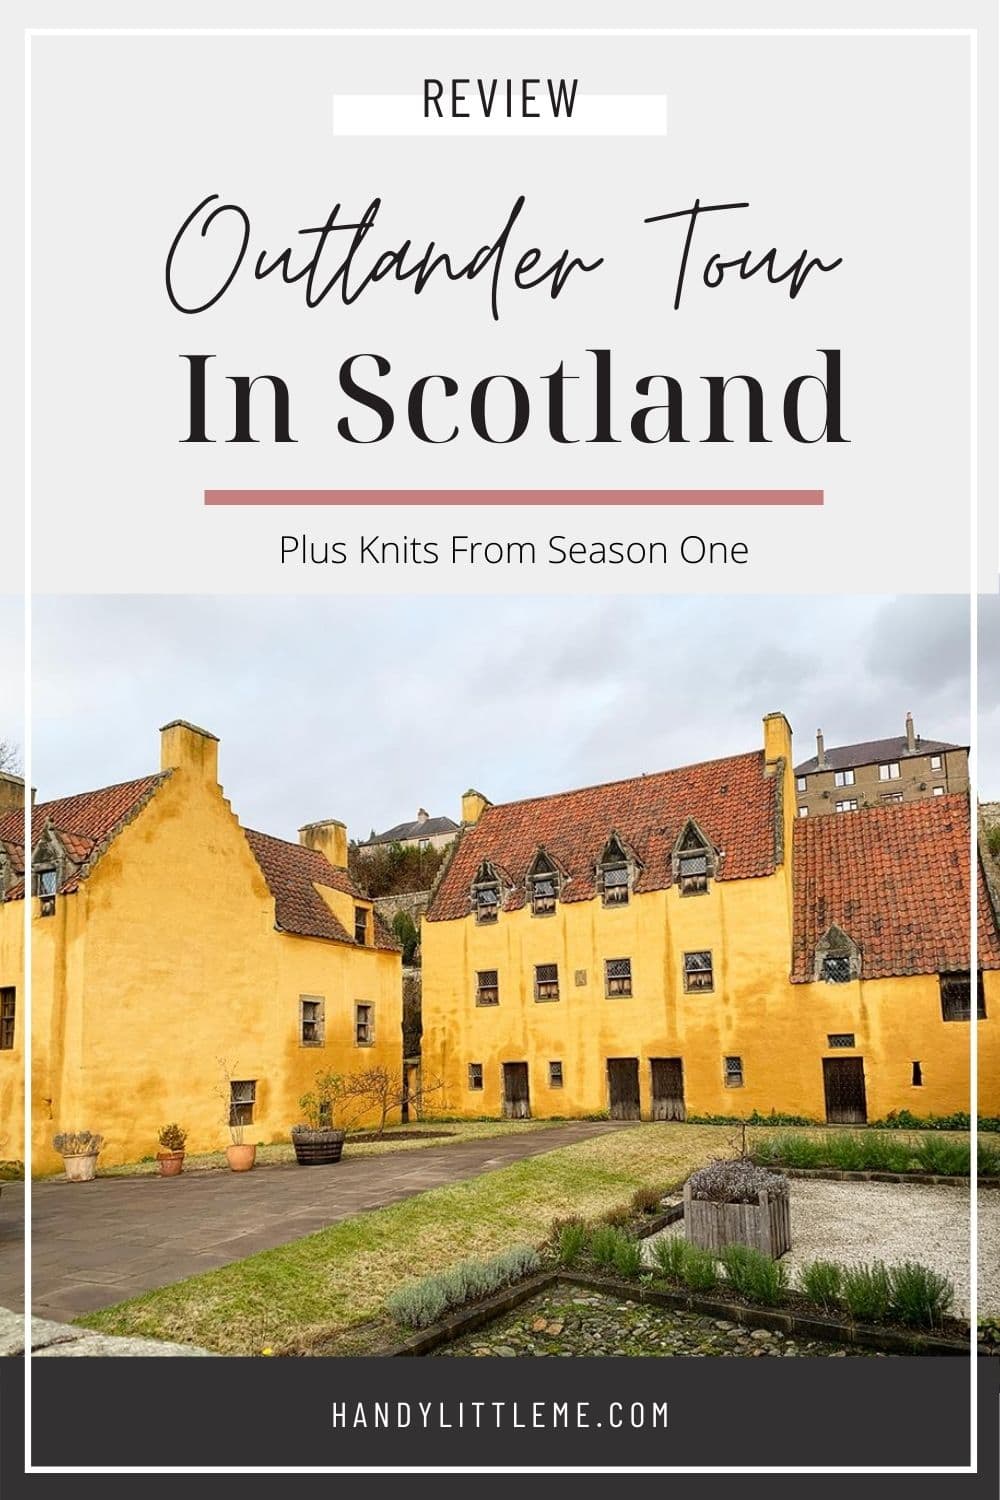 Outlander Tour In Scotland Review From Edinburgh Handy Little Me